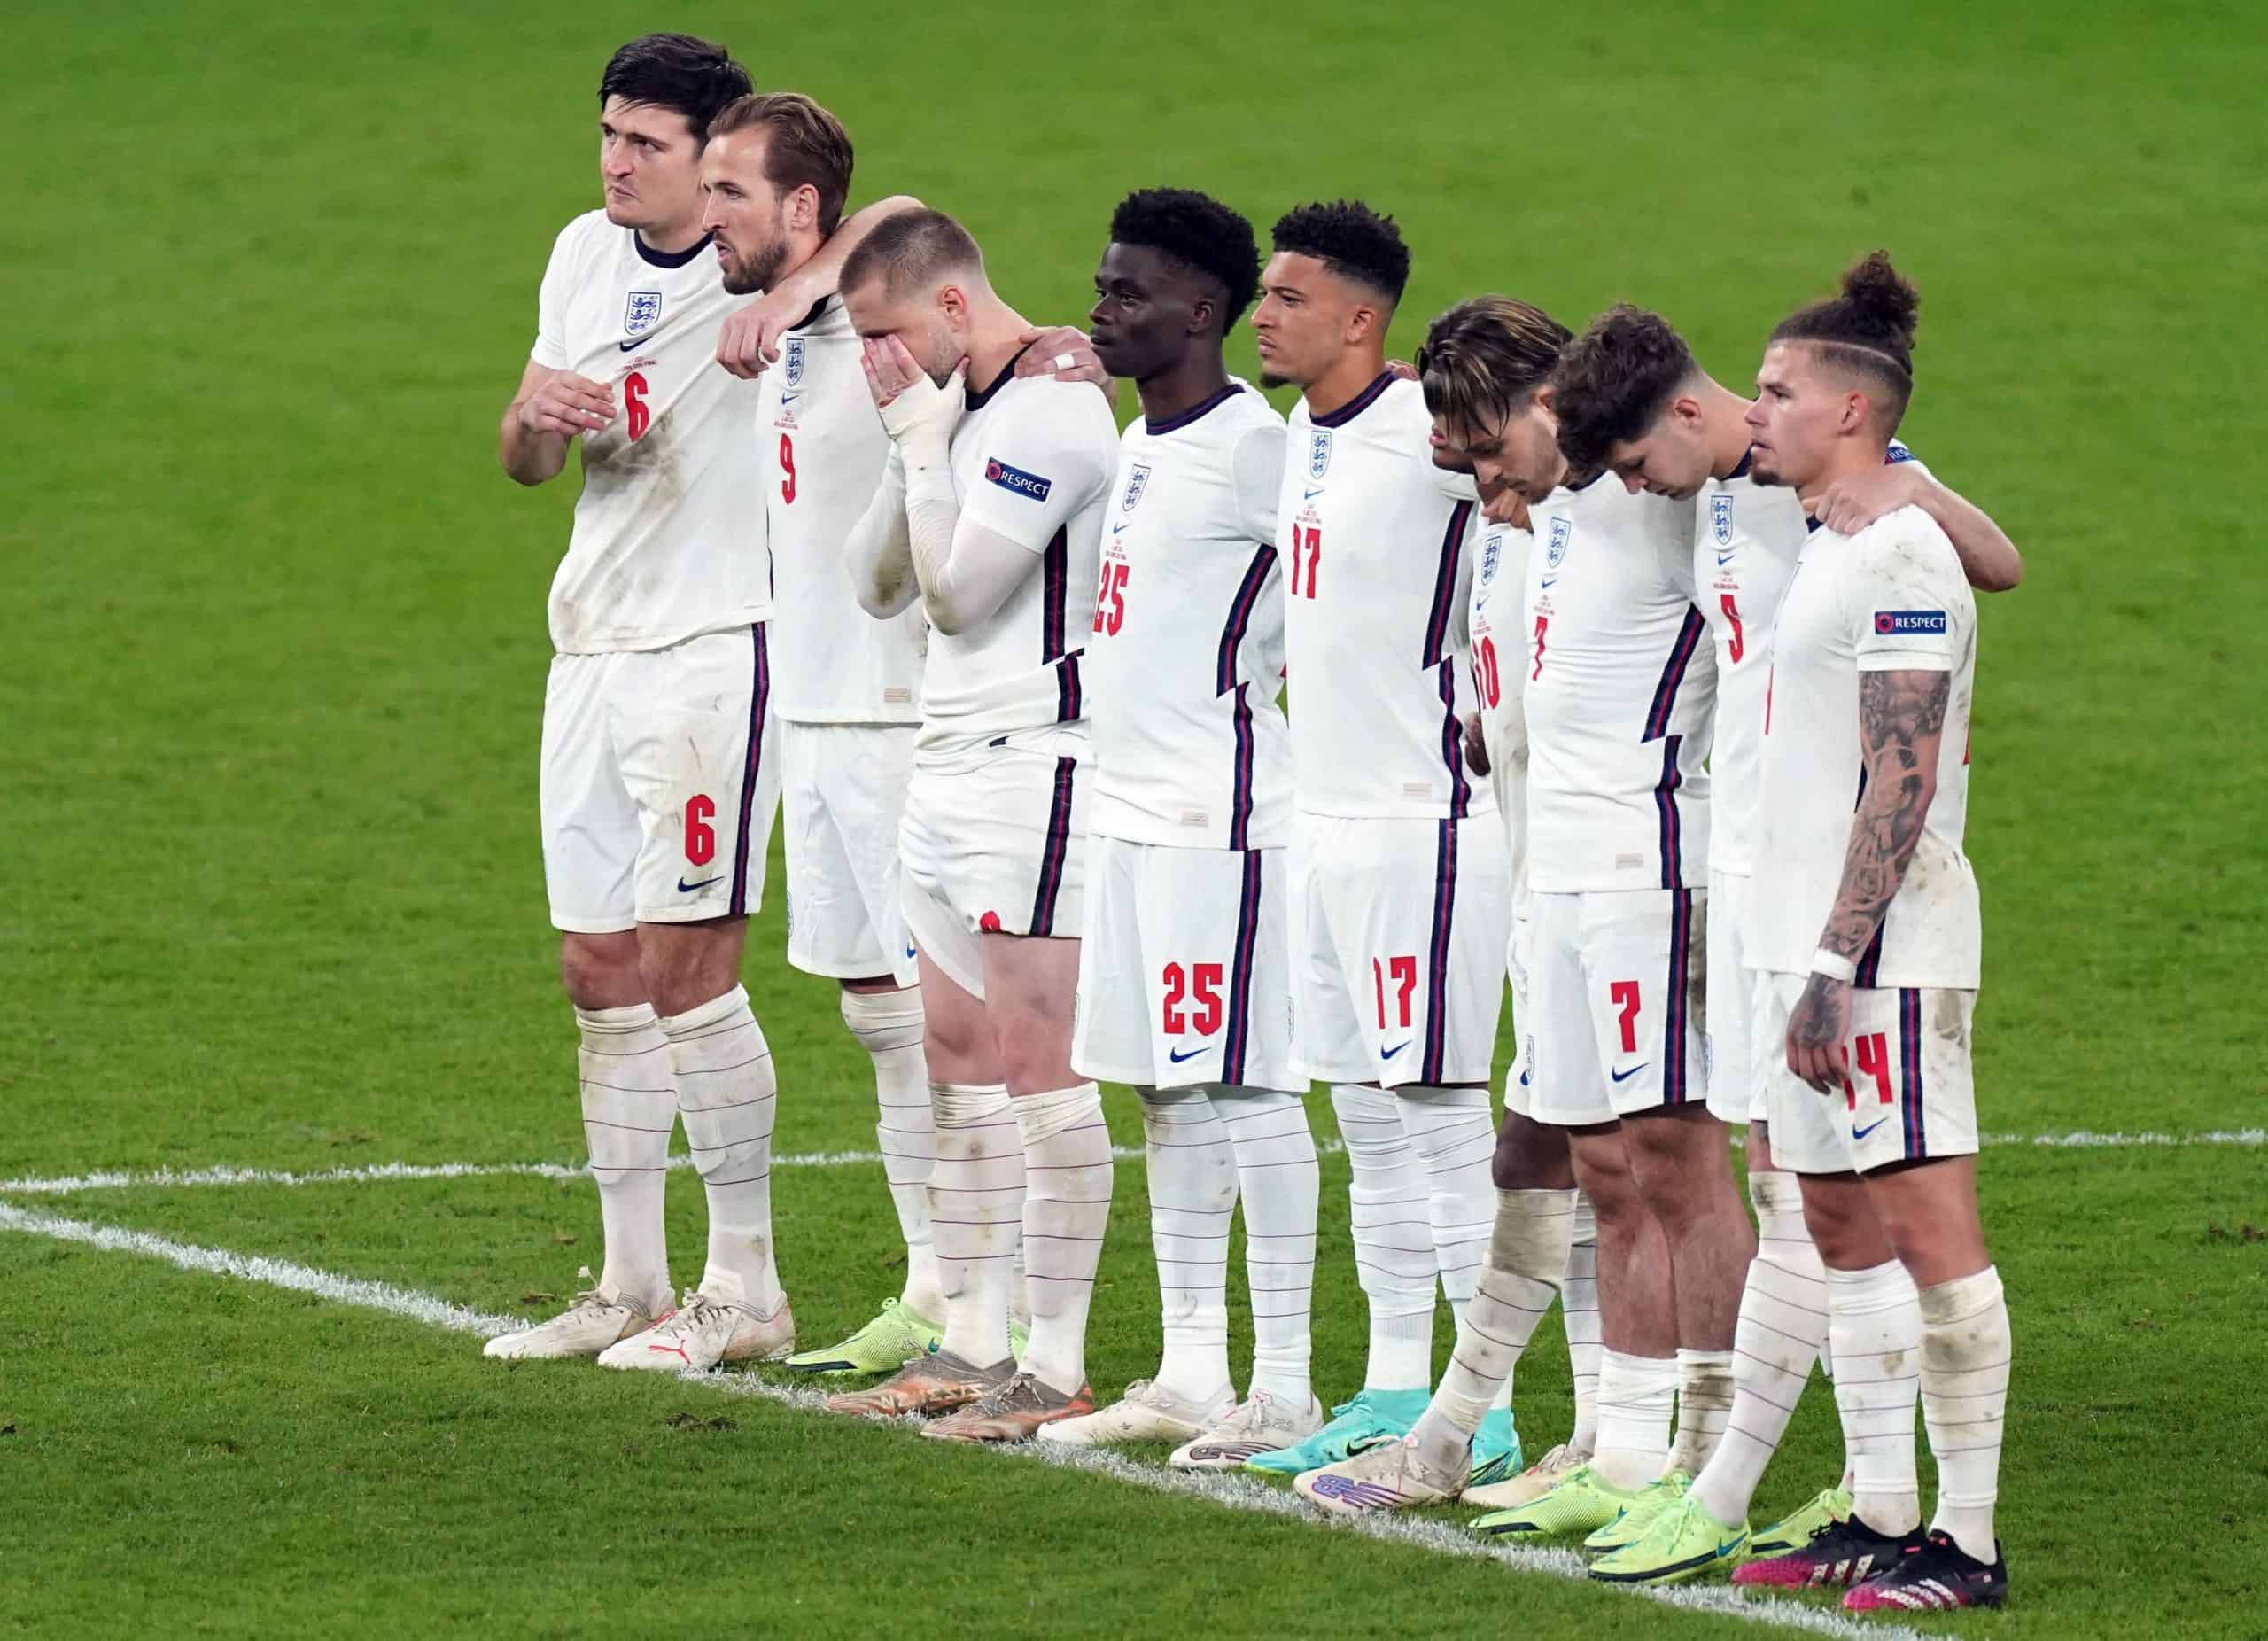 Petition to ban racists from football matches in England passes 500k signatures